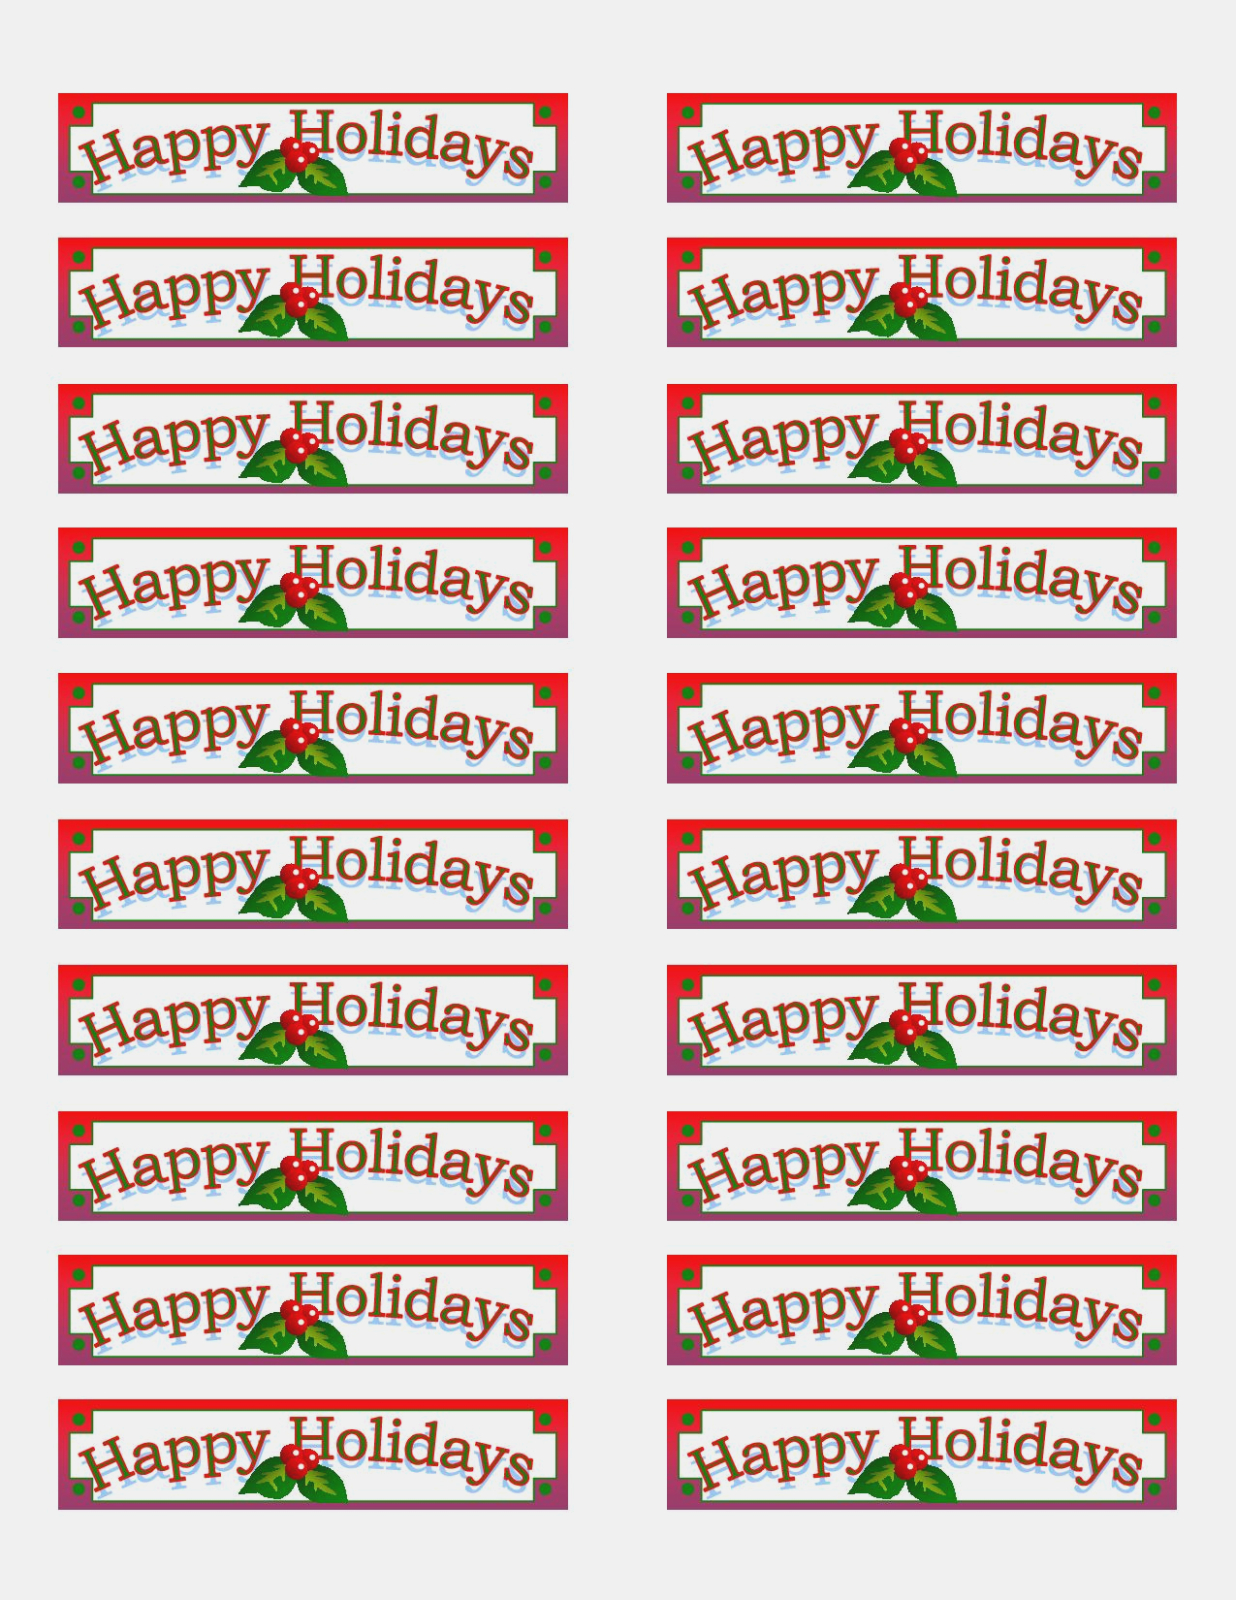 All You Need To Know About Free Avery | Label Maker Ideas - Free Printable Christmas Address Labels Avery 5160